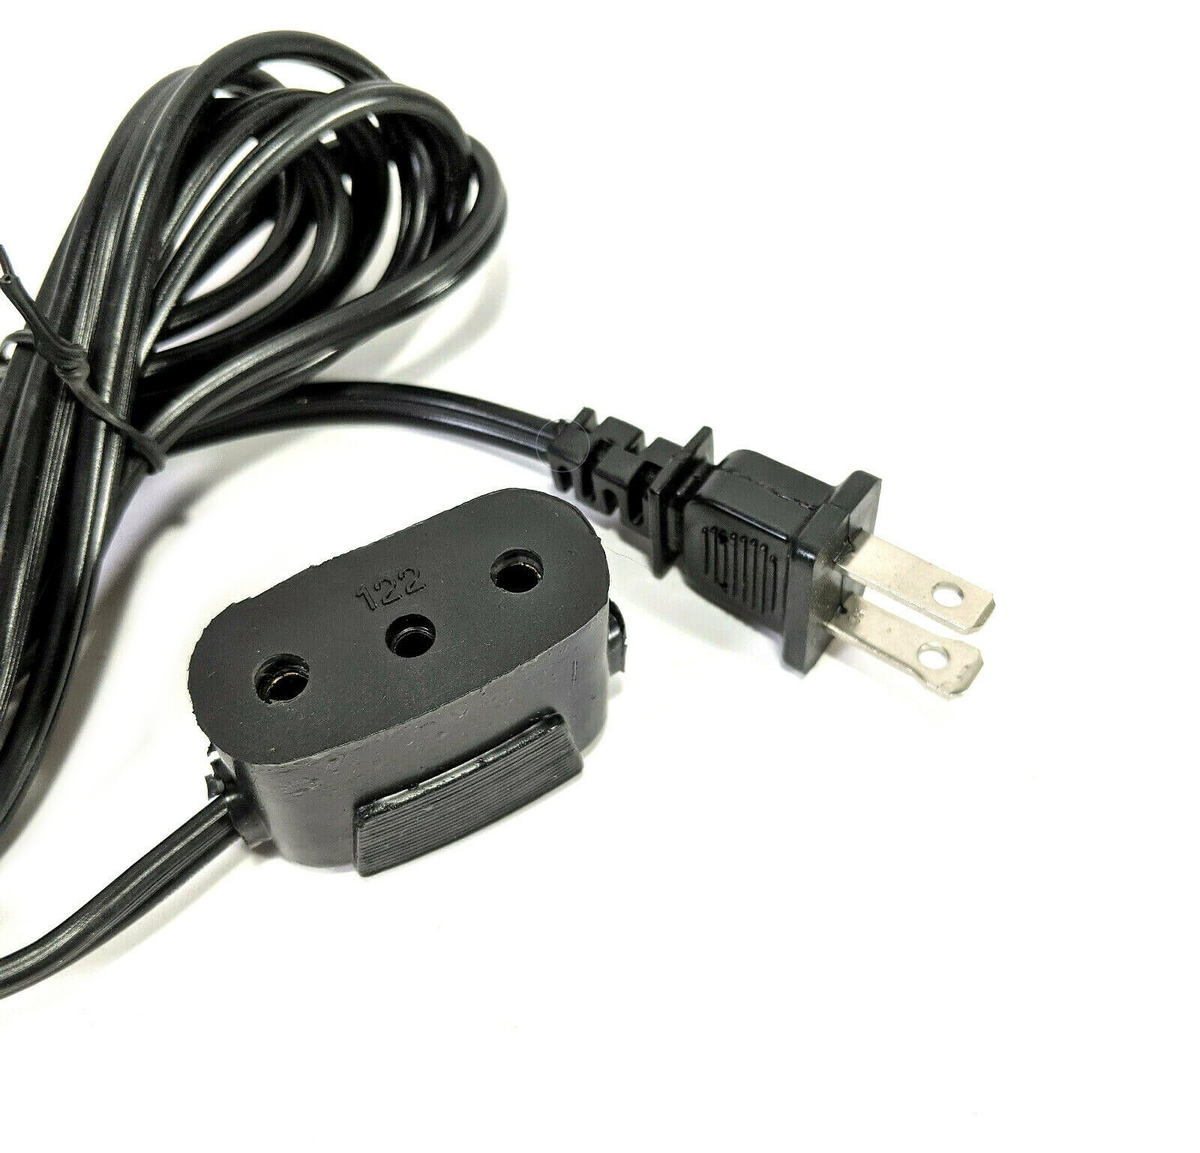 Power Cord #122 for Singer Sewing Machine 503 15-30,15-88,15-90,15